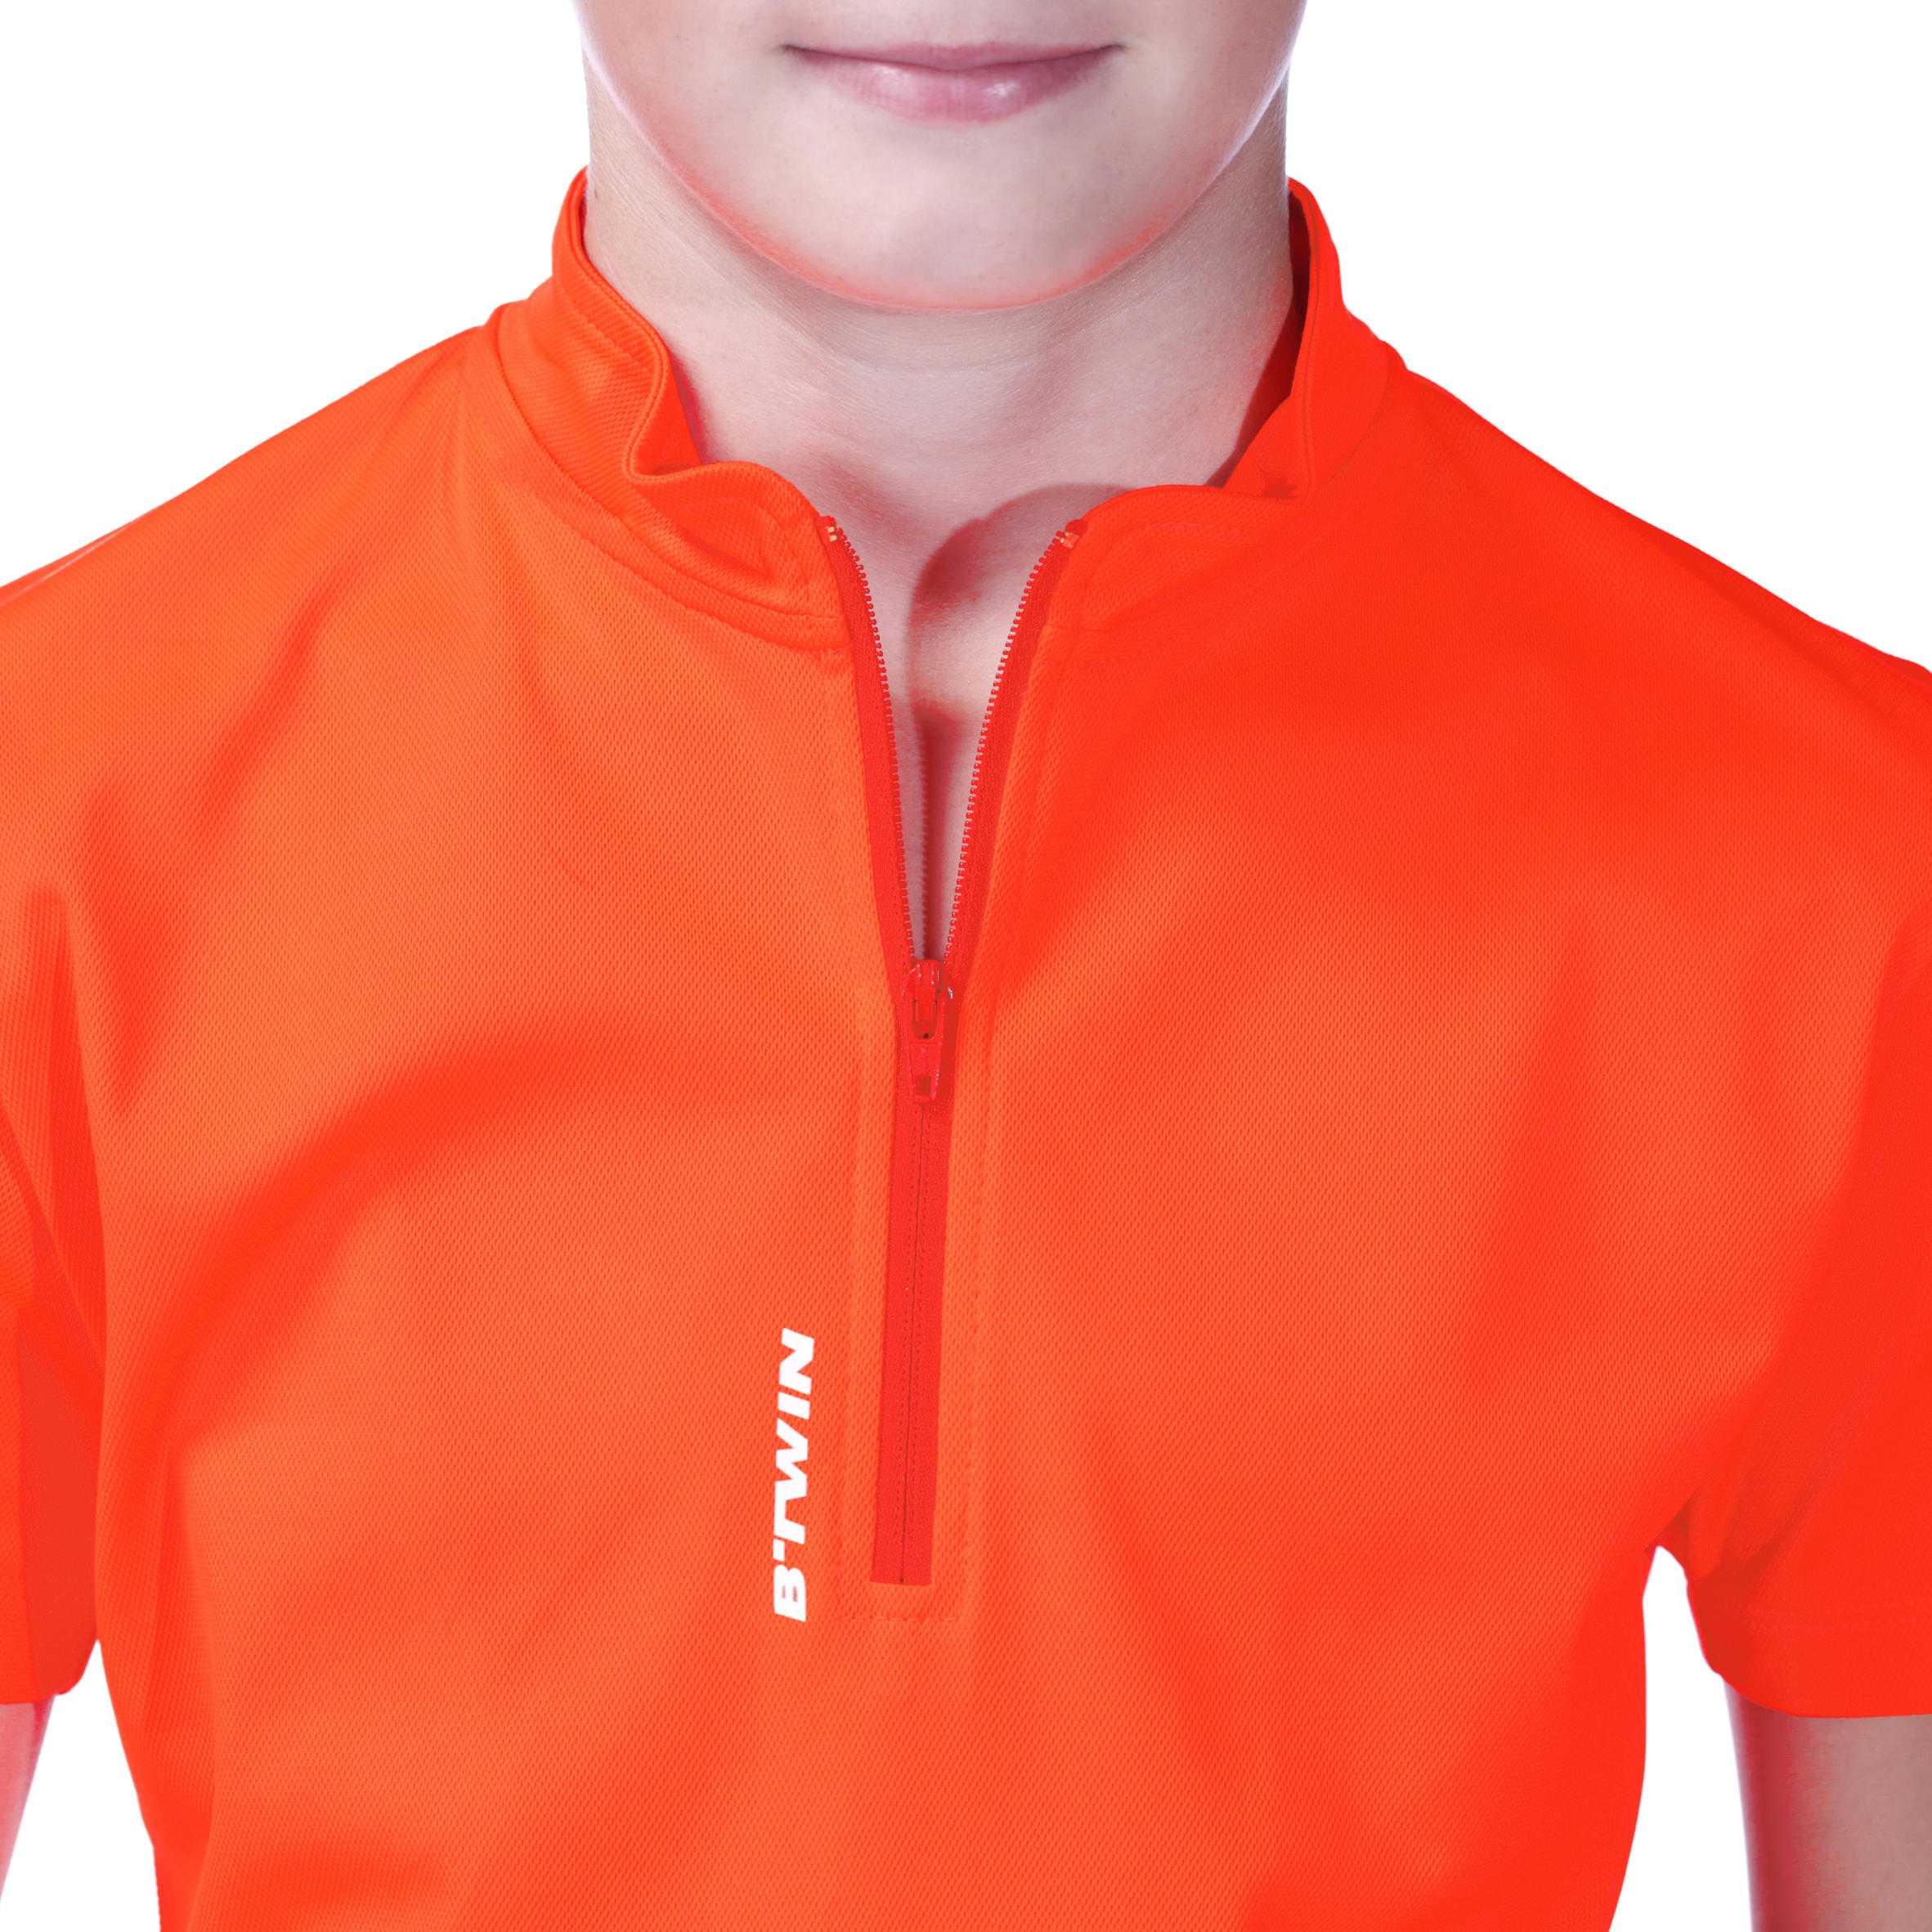 300 Kids' Short Sleeve Cycling Jersey - Red 10/10